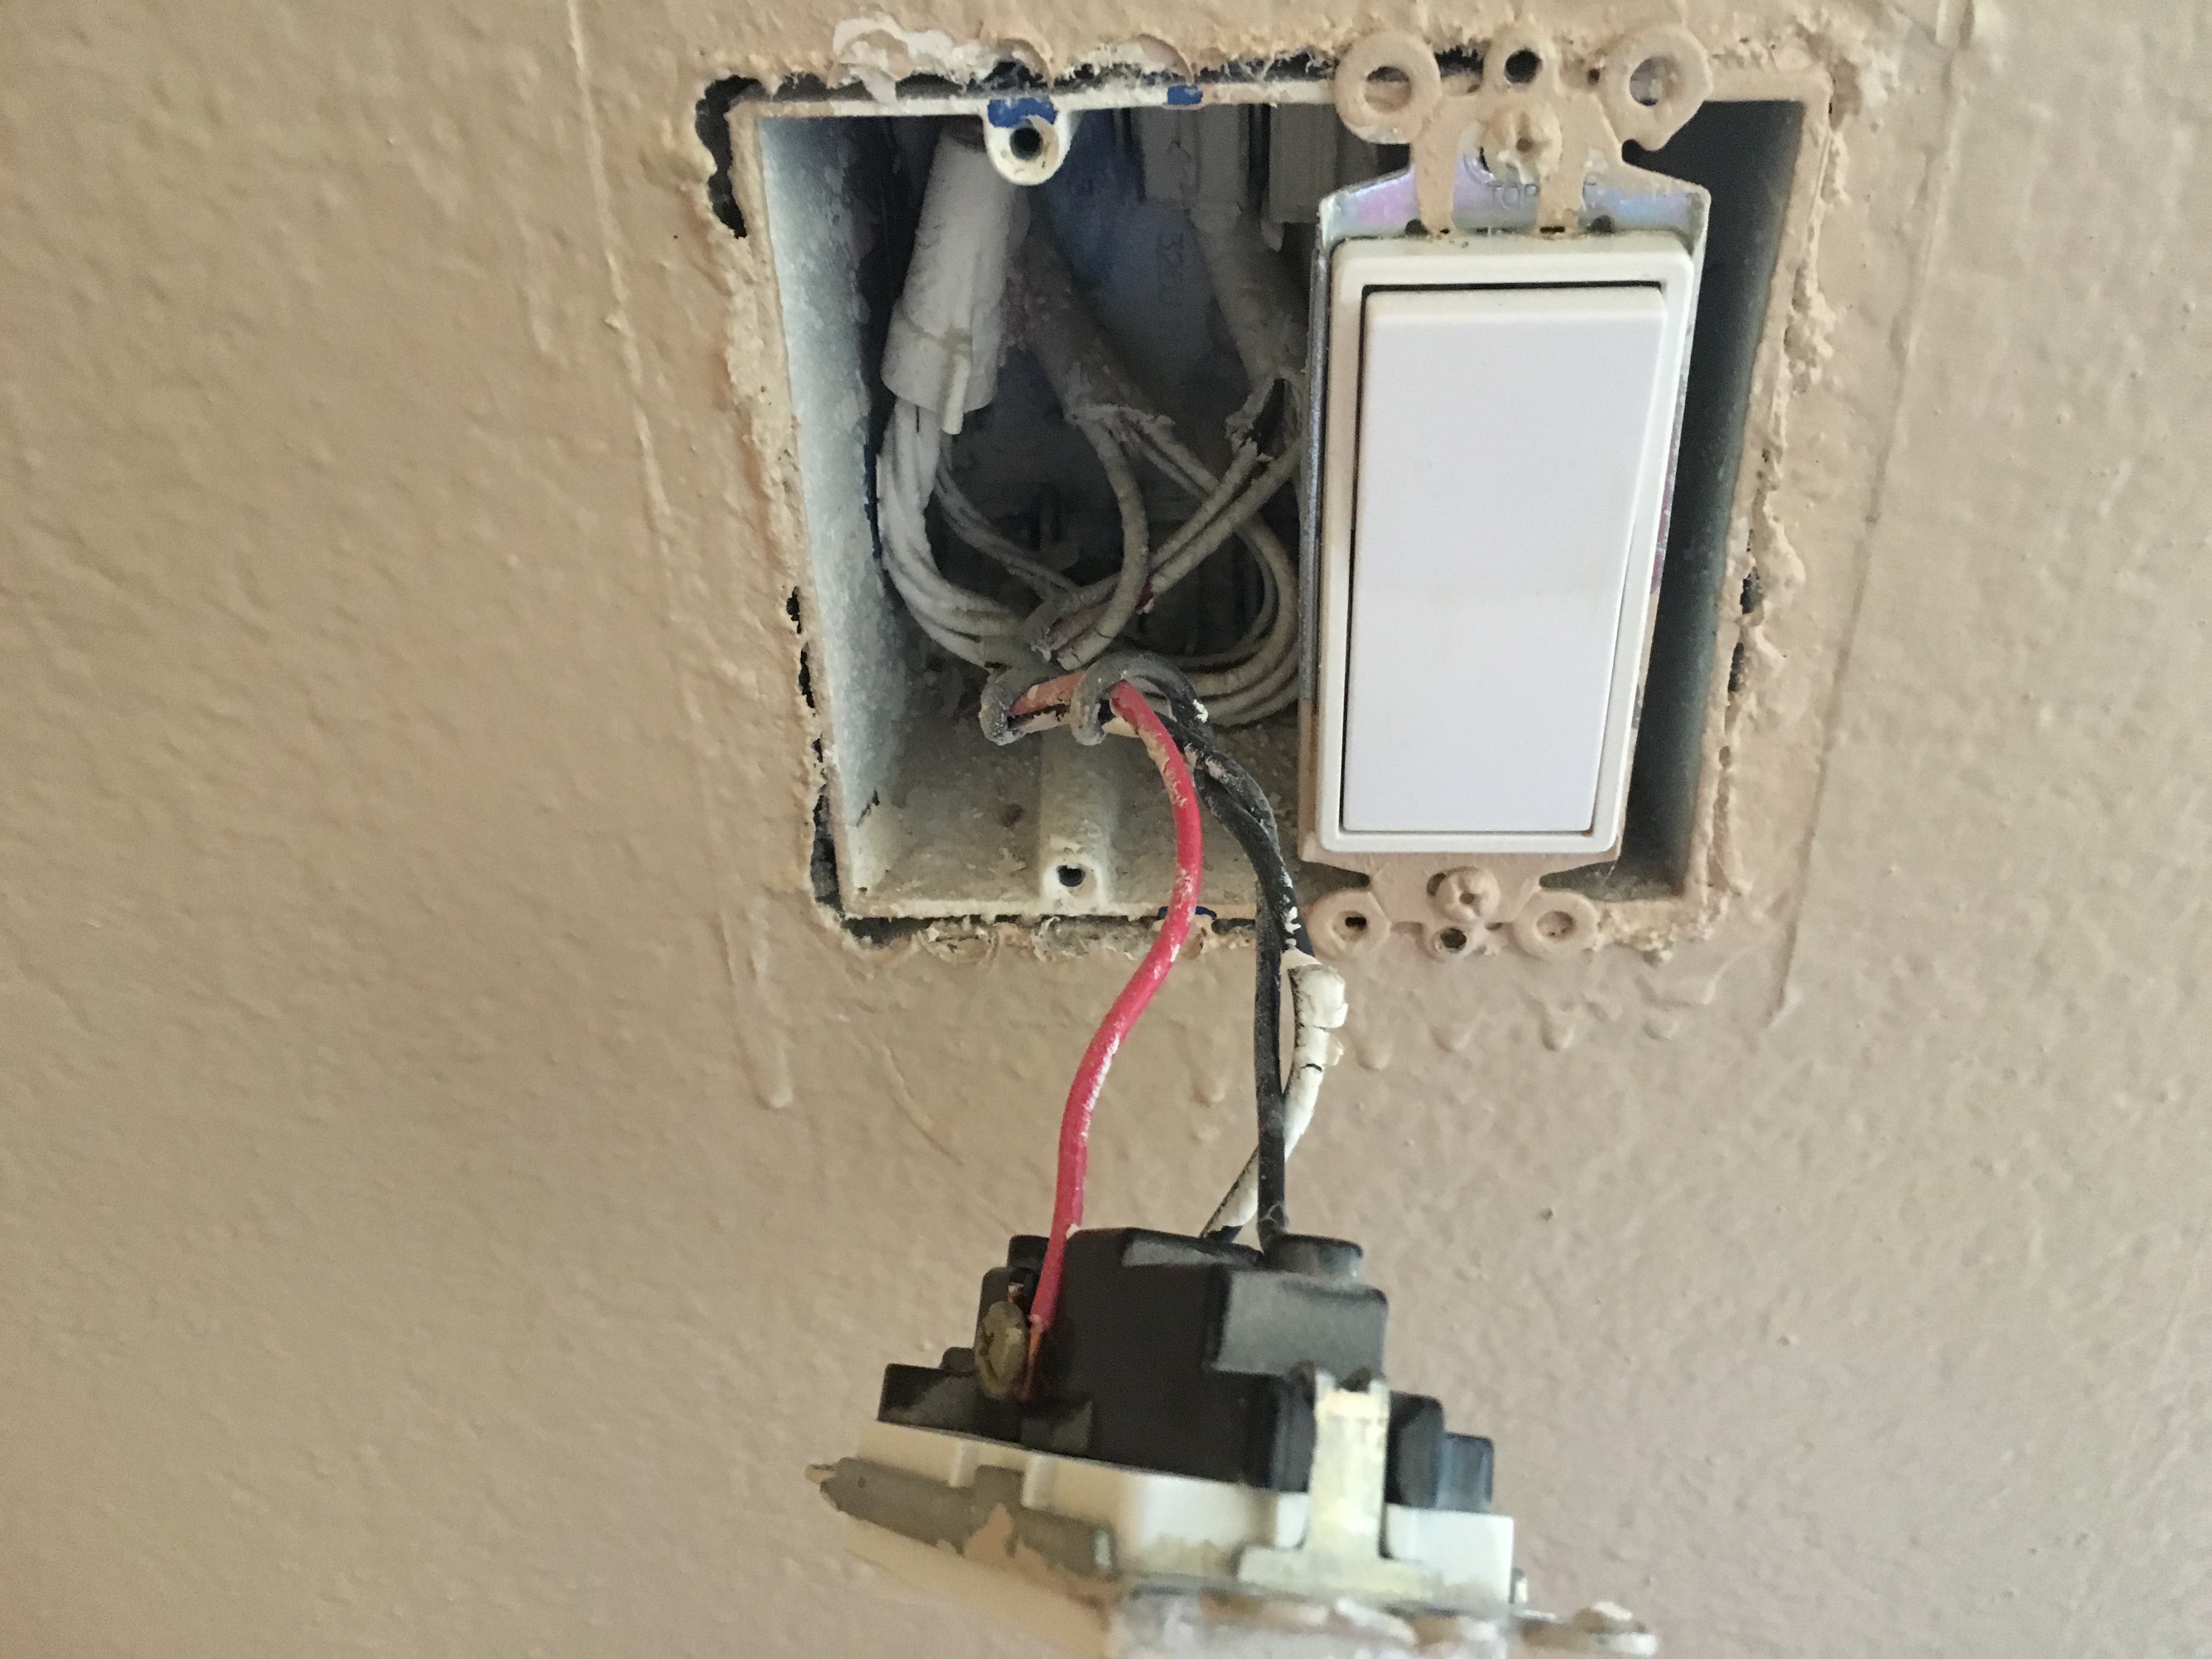 Wiring A Ceiling Fan With Separate Switches For Light And Fan